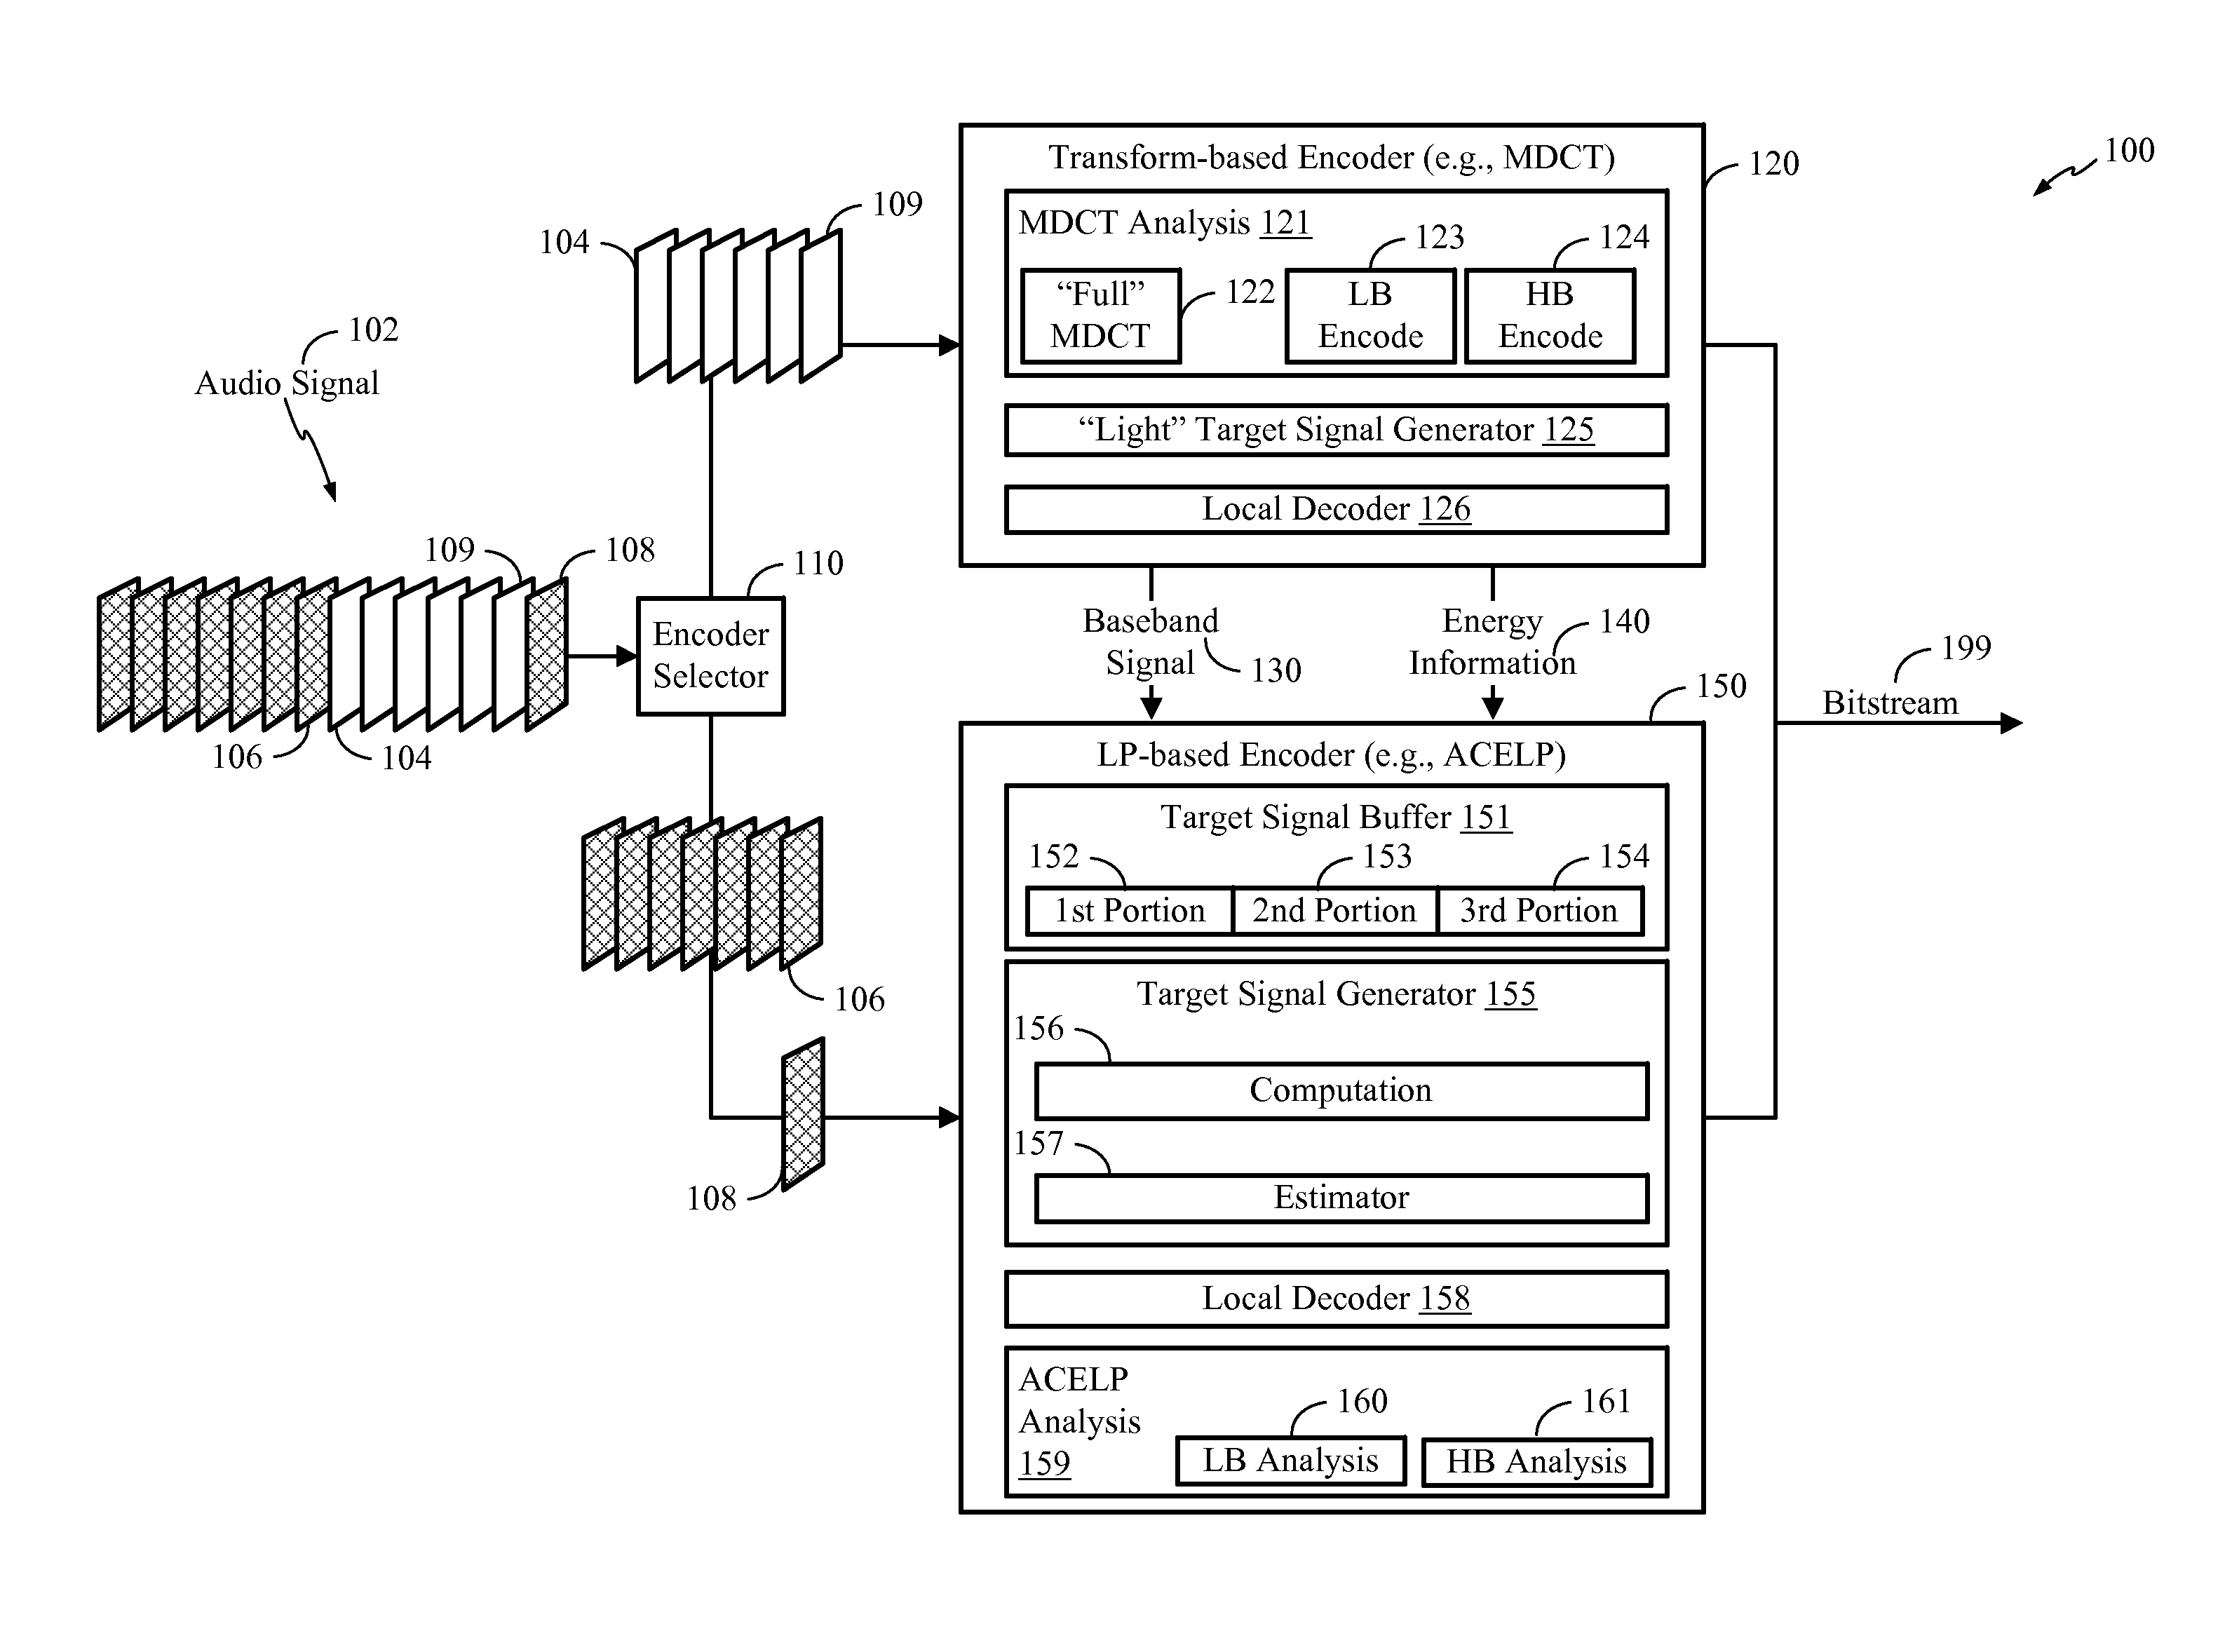 Systems and methods of switching coding technologies at a device